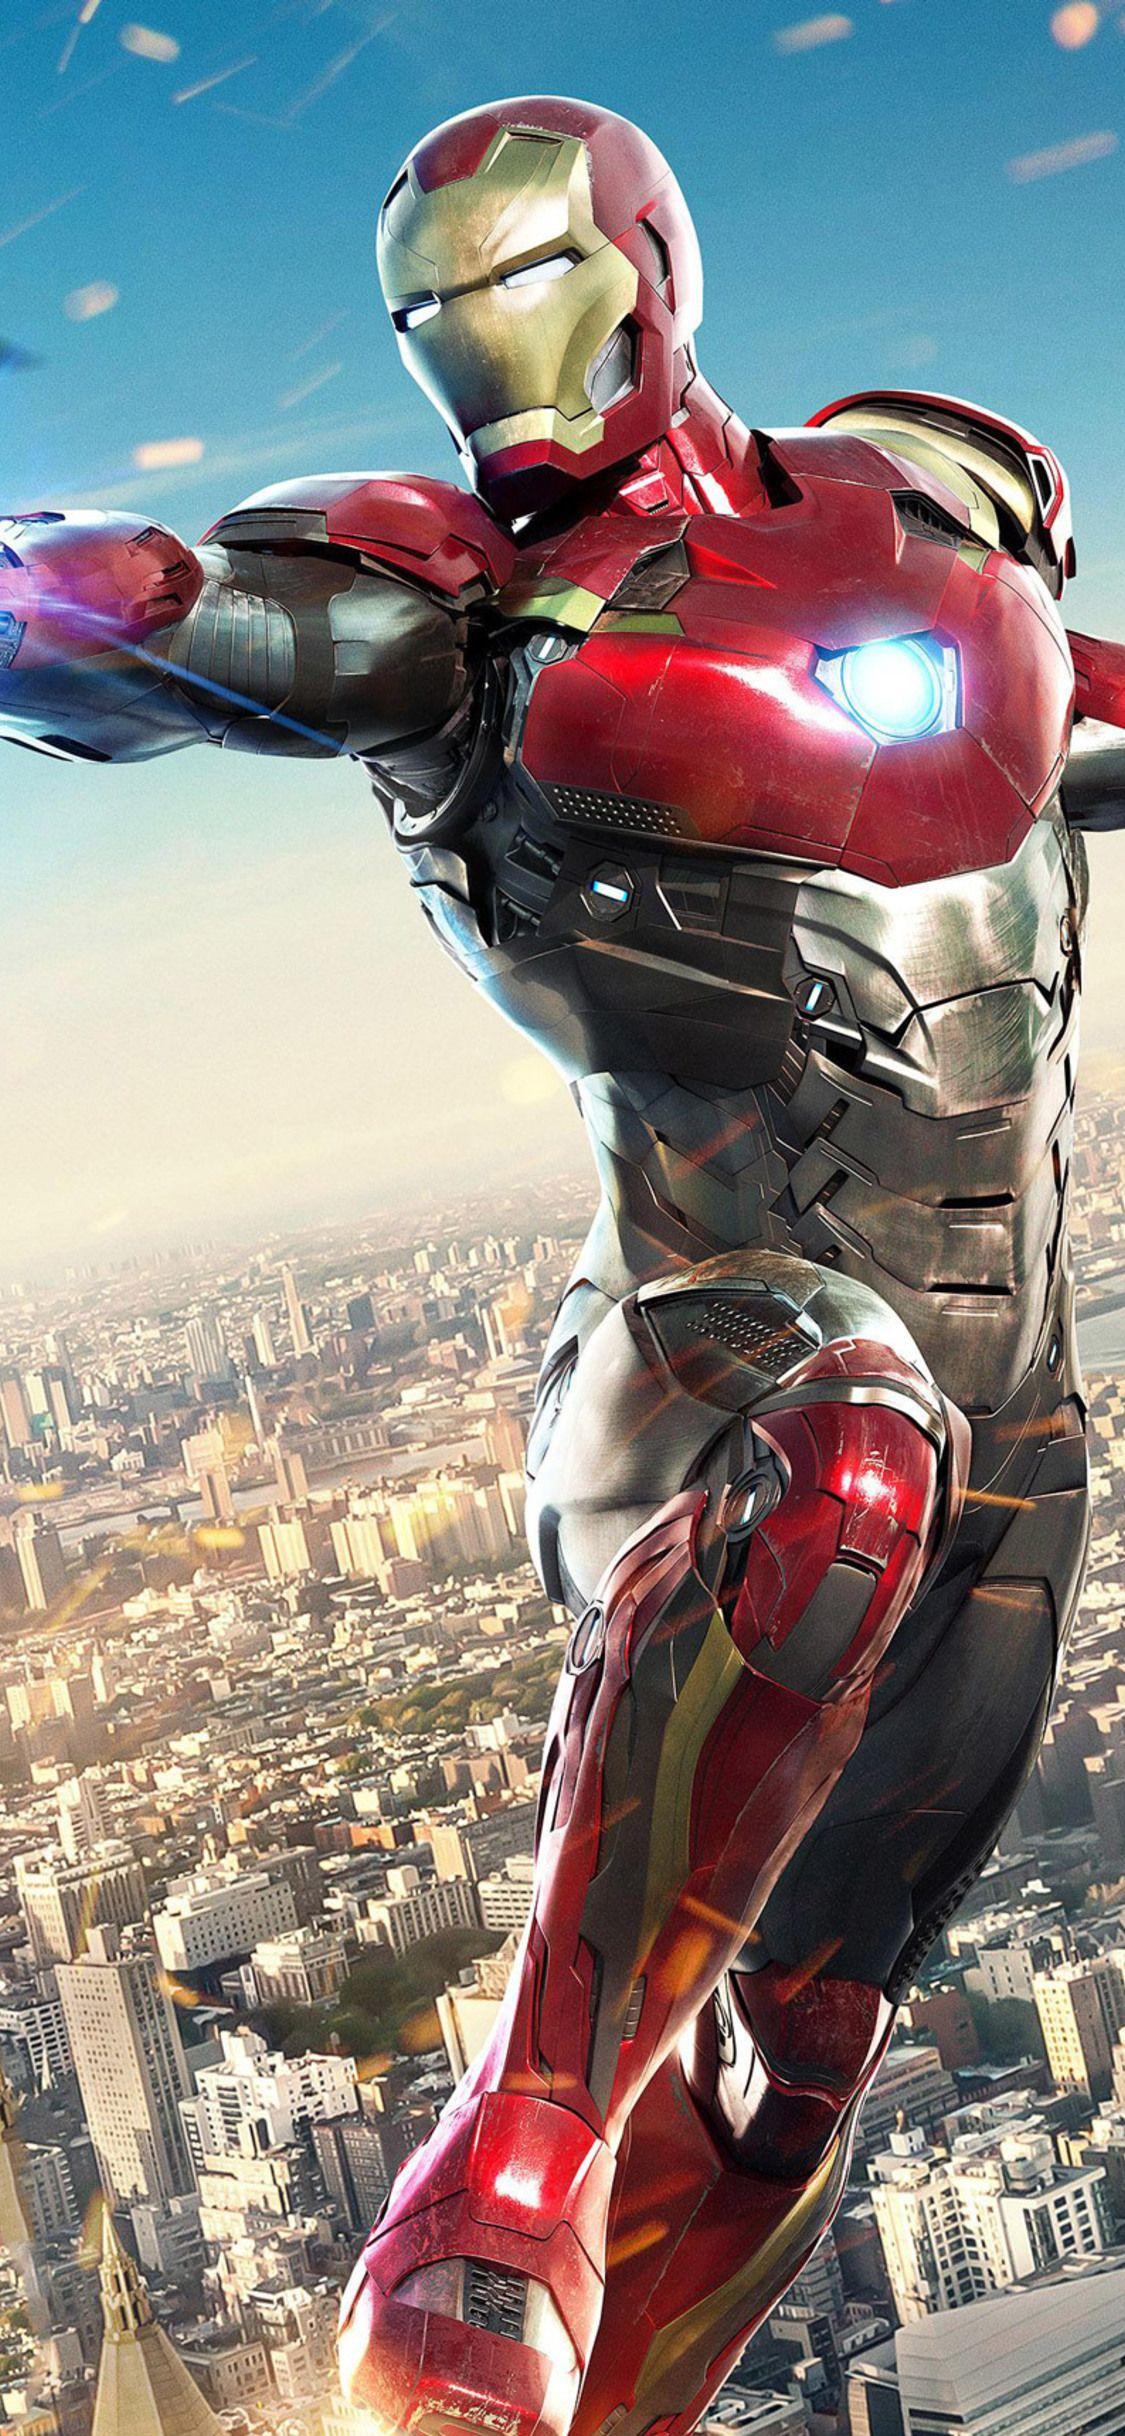 Iron Man And Spiderman In Spiderman Homecoming 4k HD iPhone XS, iPhone iPhone X HD 4k W. Iron man HD wallpaper, Iron man spiderman, Iron man wallpaper